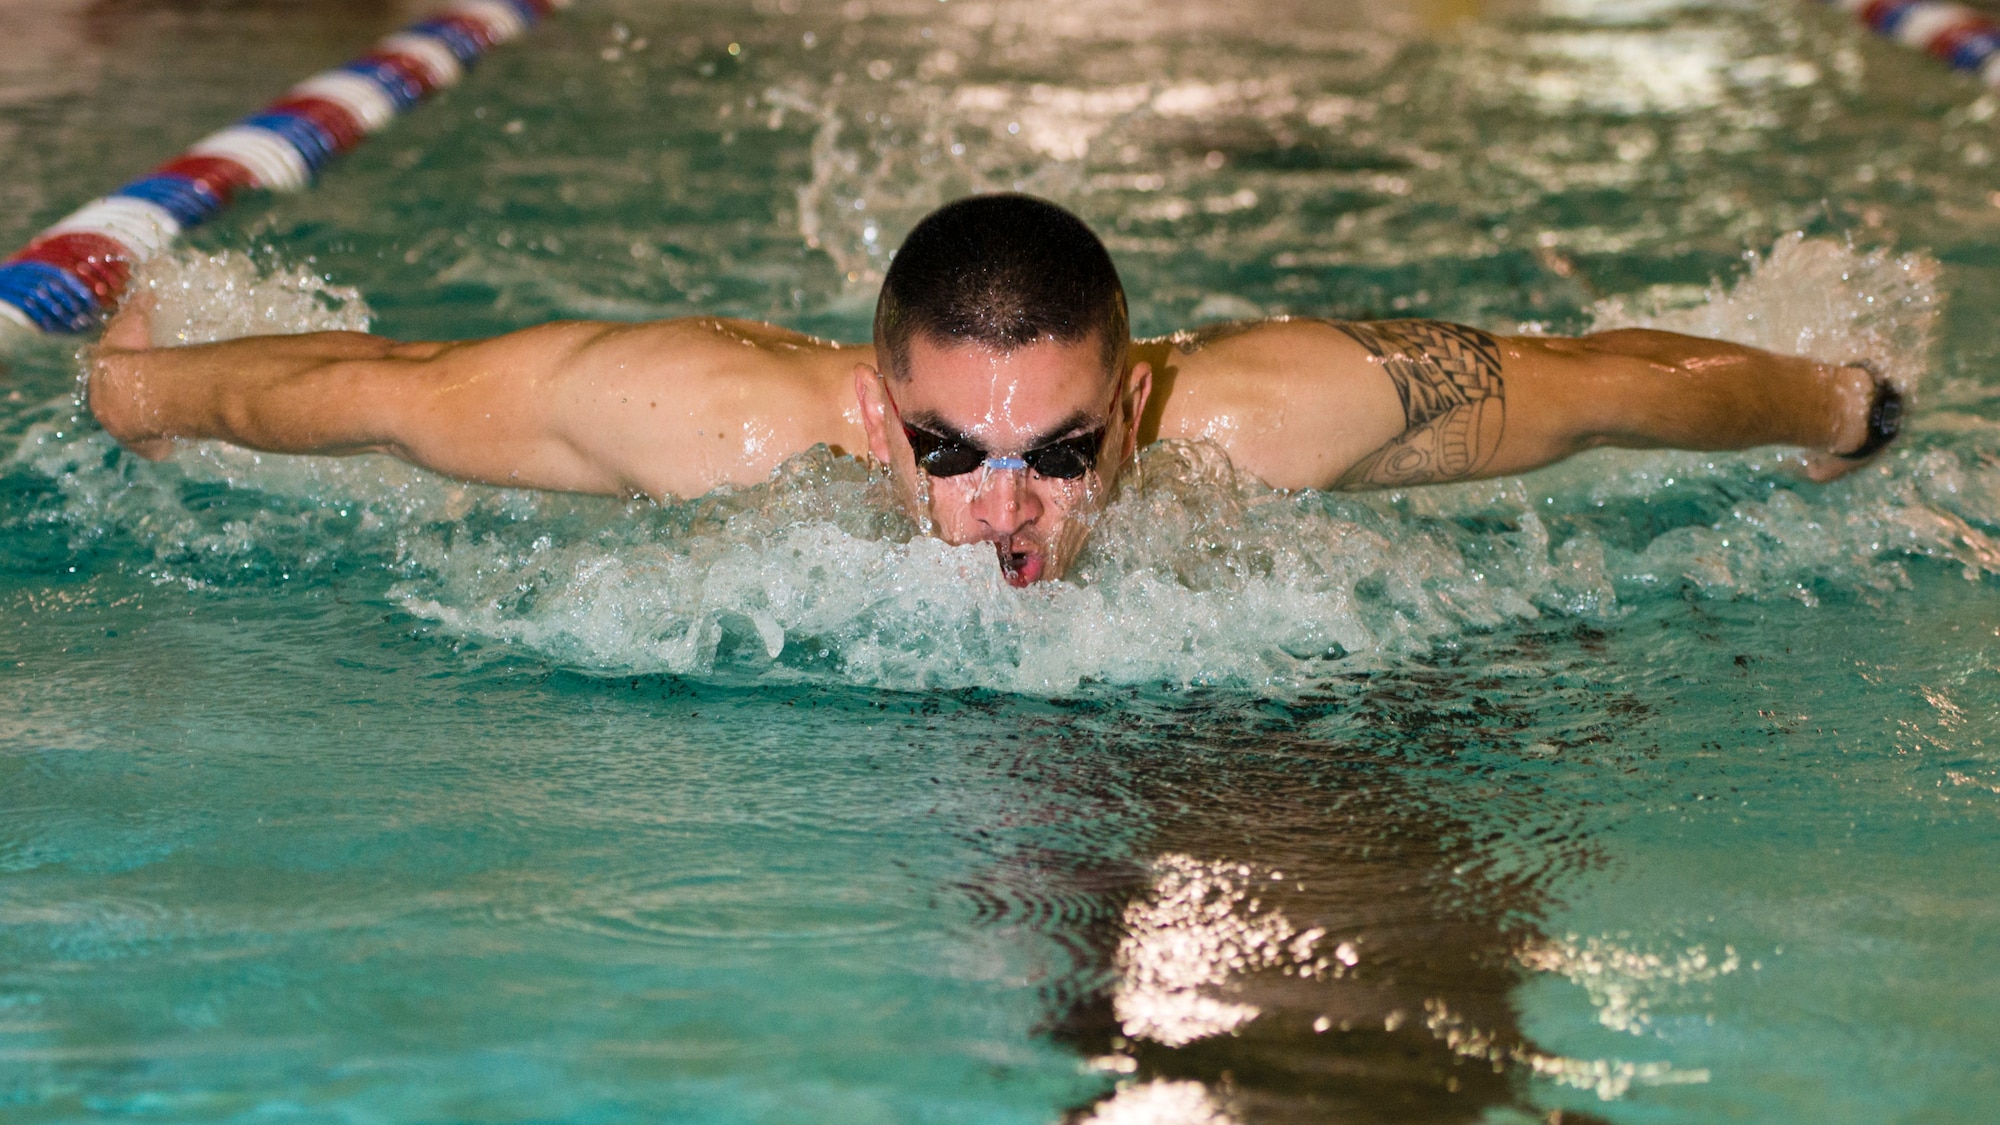 Airman 1st Class Eliezer Lizardi, 5th Munitions Squadron ammunition storage crew member, swims laps during the Summer Games at Minot Air Force Base, N.D., Aug. 30, 2016. The 4x200m freestyle relay was a new event added to the biannual games. (U.S. Air Force photo/Airman 1st Class J.T. Armstrong)